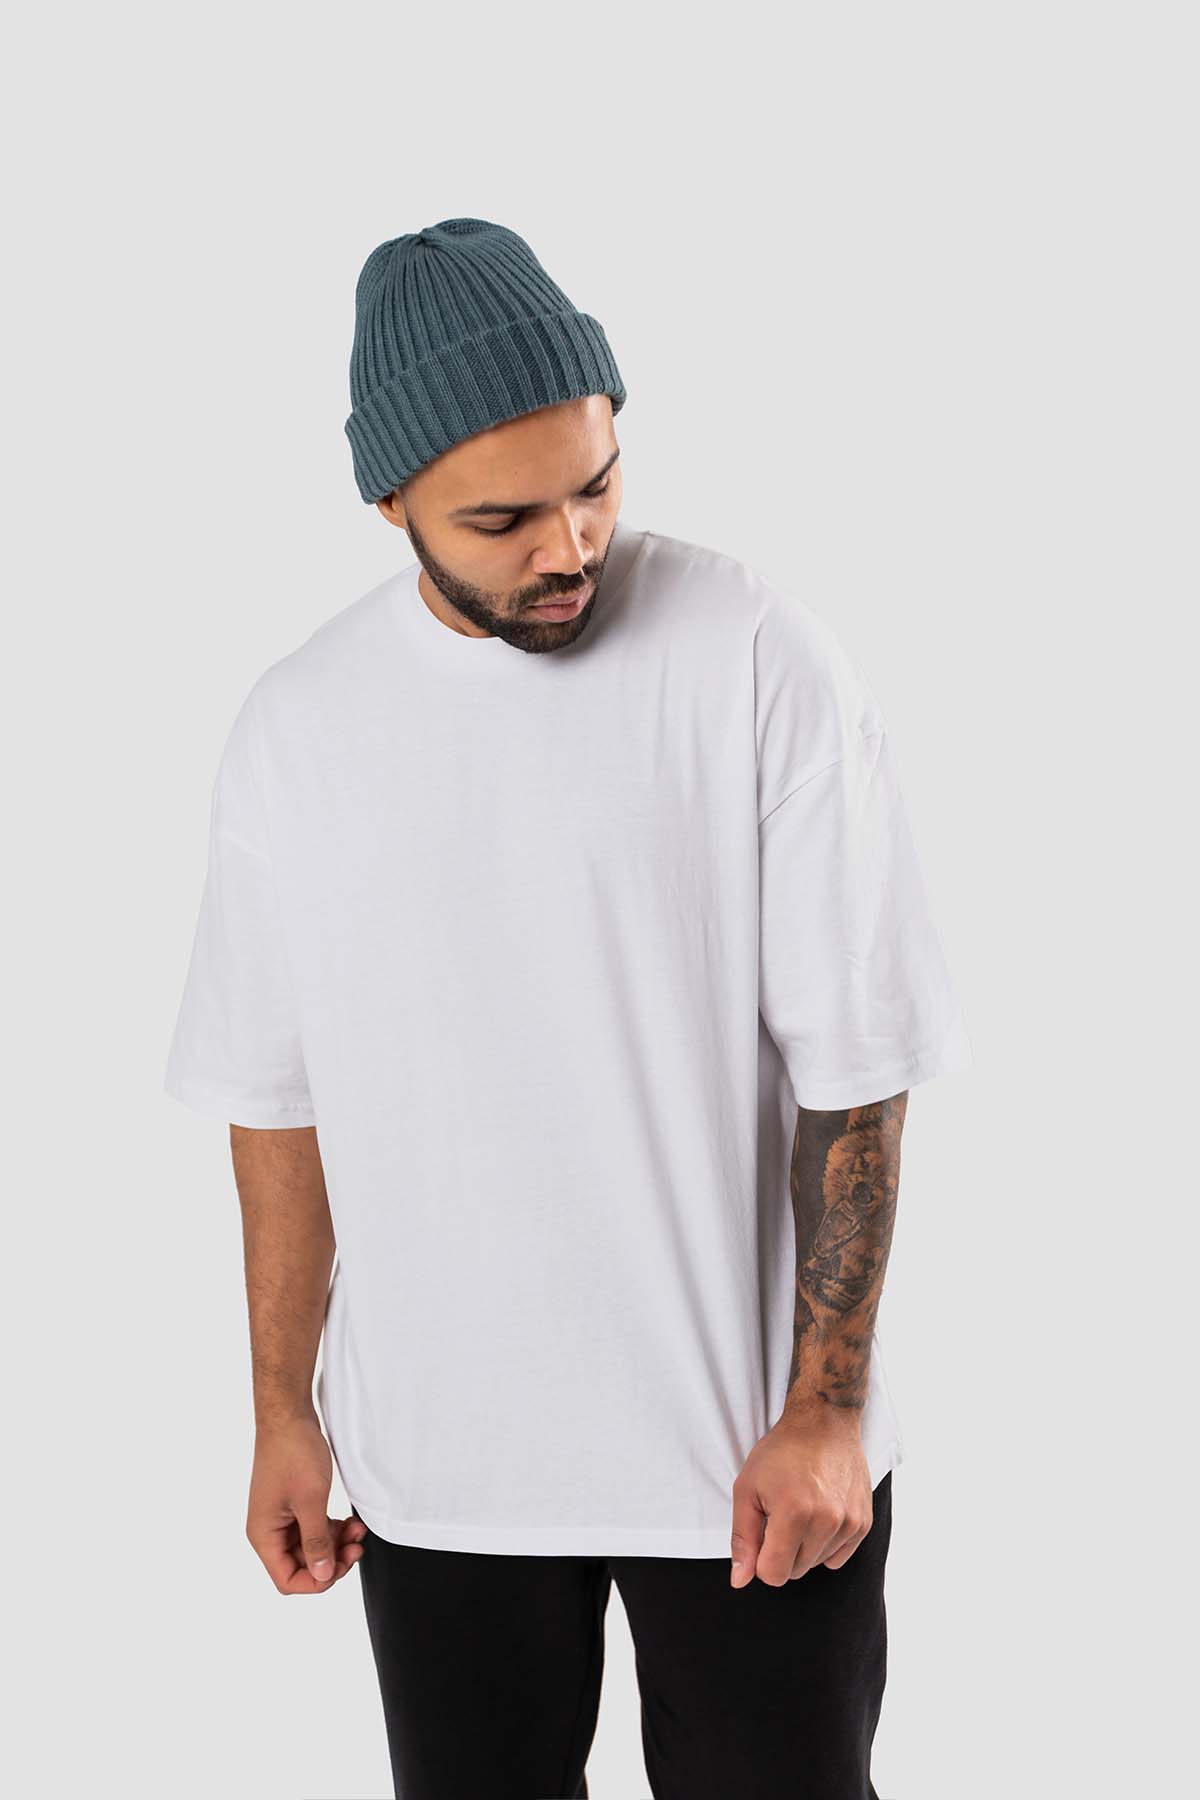 Urban Fit Oversized Essential T-shirt - Off-White - keos.life